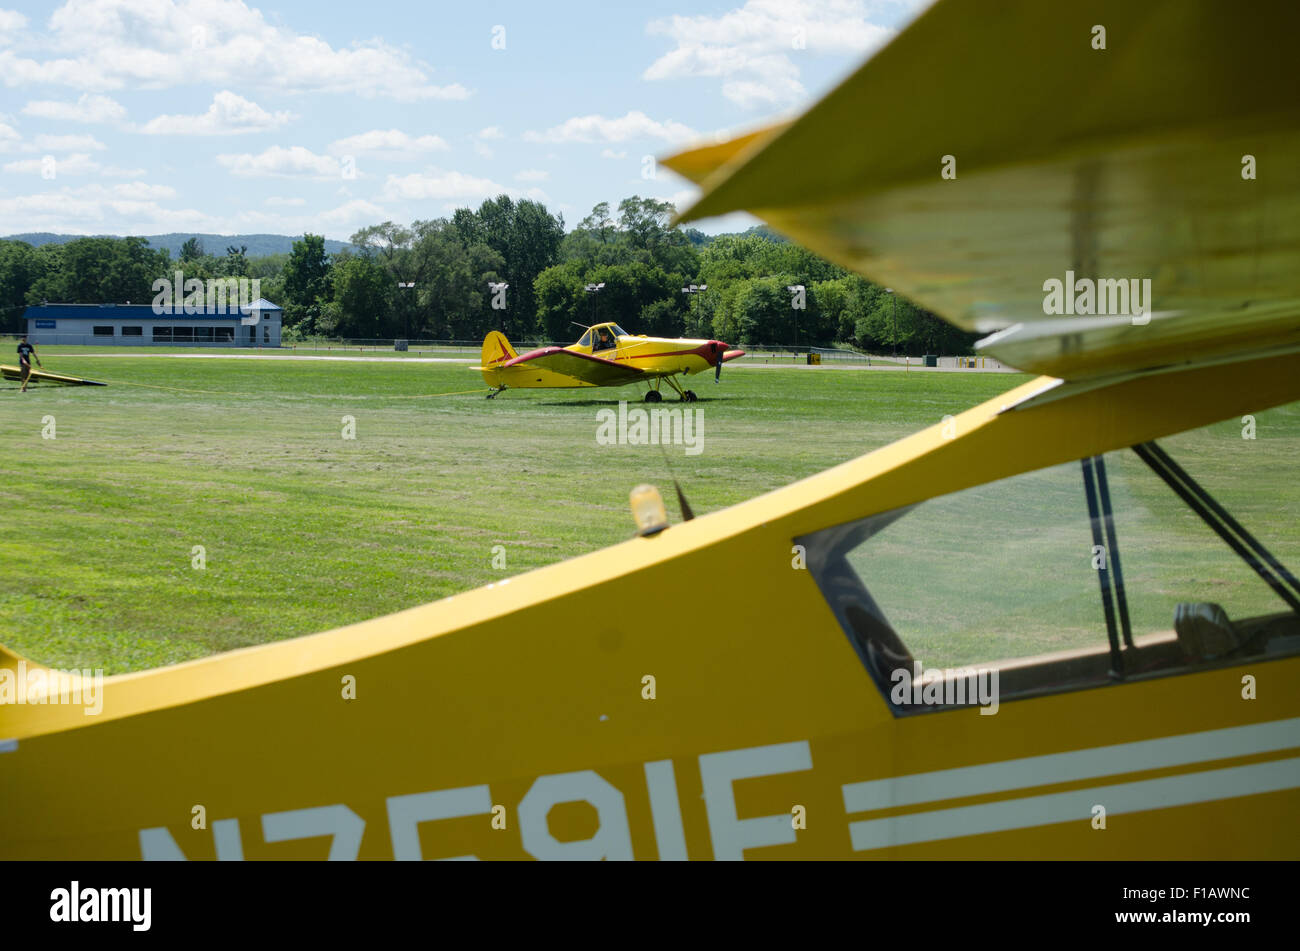 Tow planes on grass runways. Stock Photo